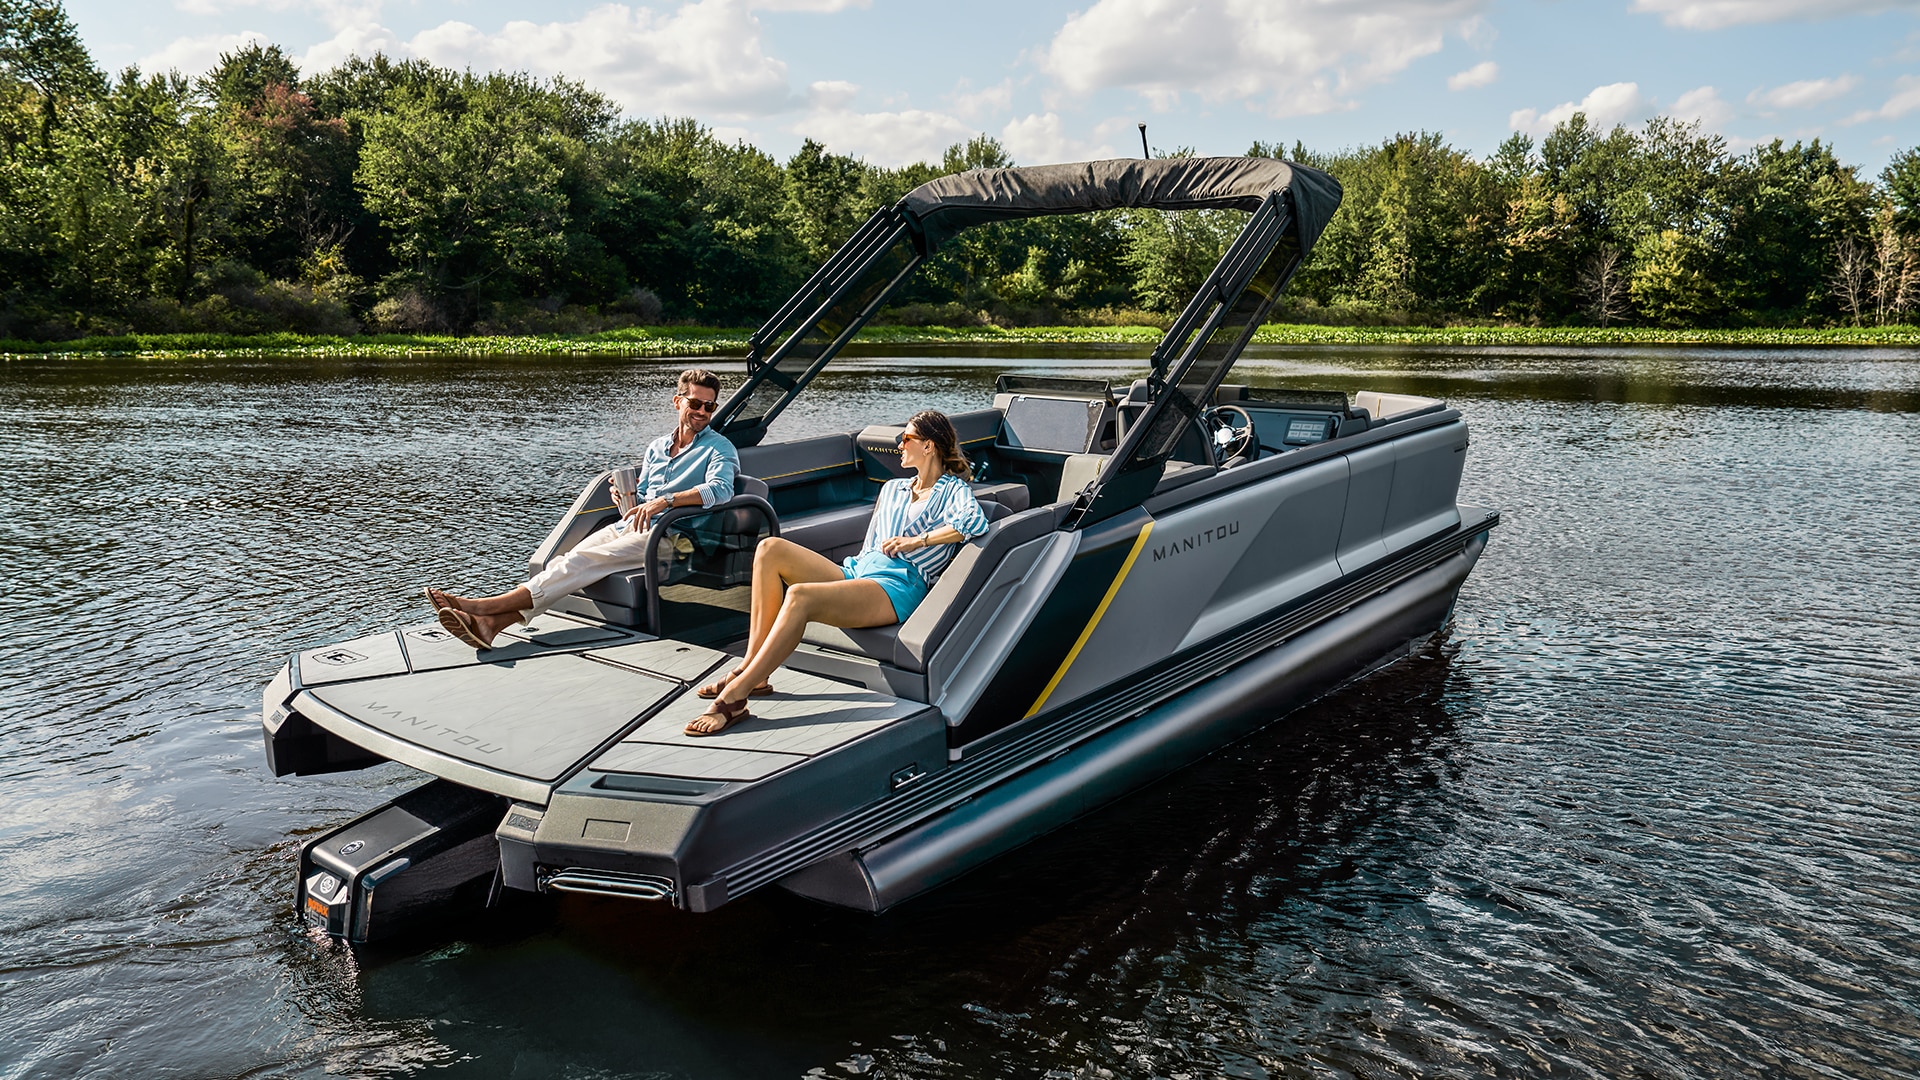 Passengers lounging on a 2023 Manitou Explore pontoon boat